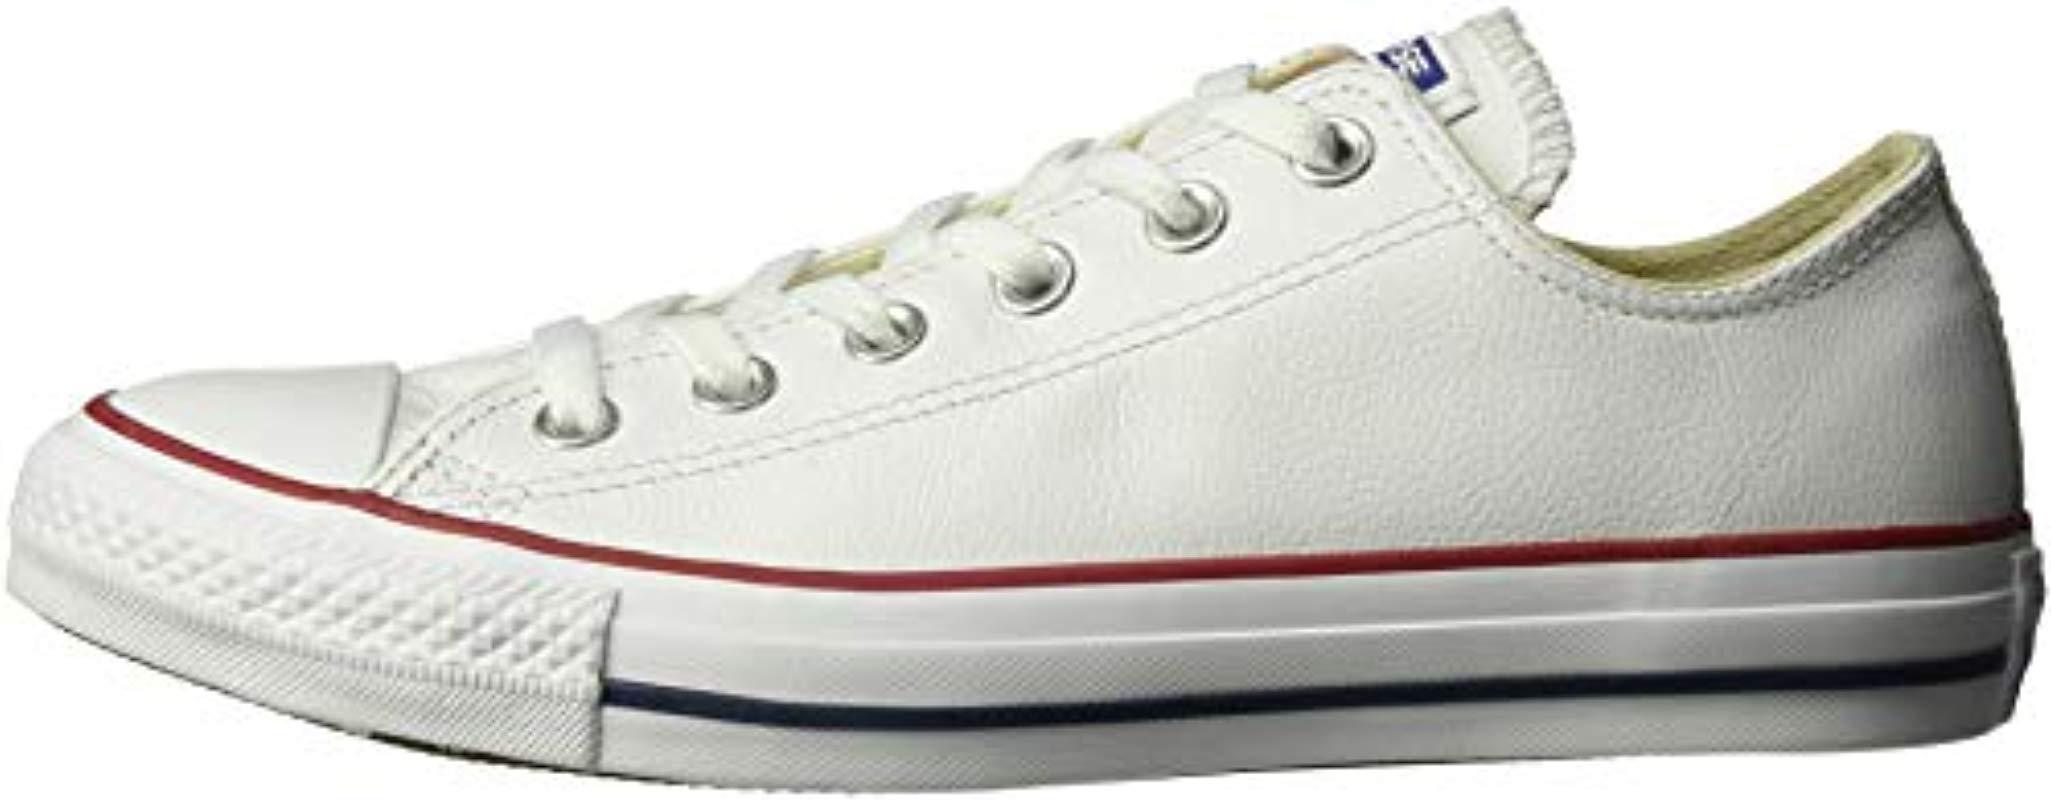 converse chuck taylor all star speciality ox low cut sneakers